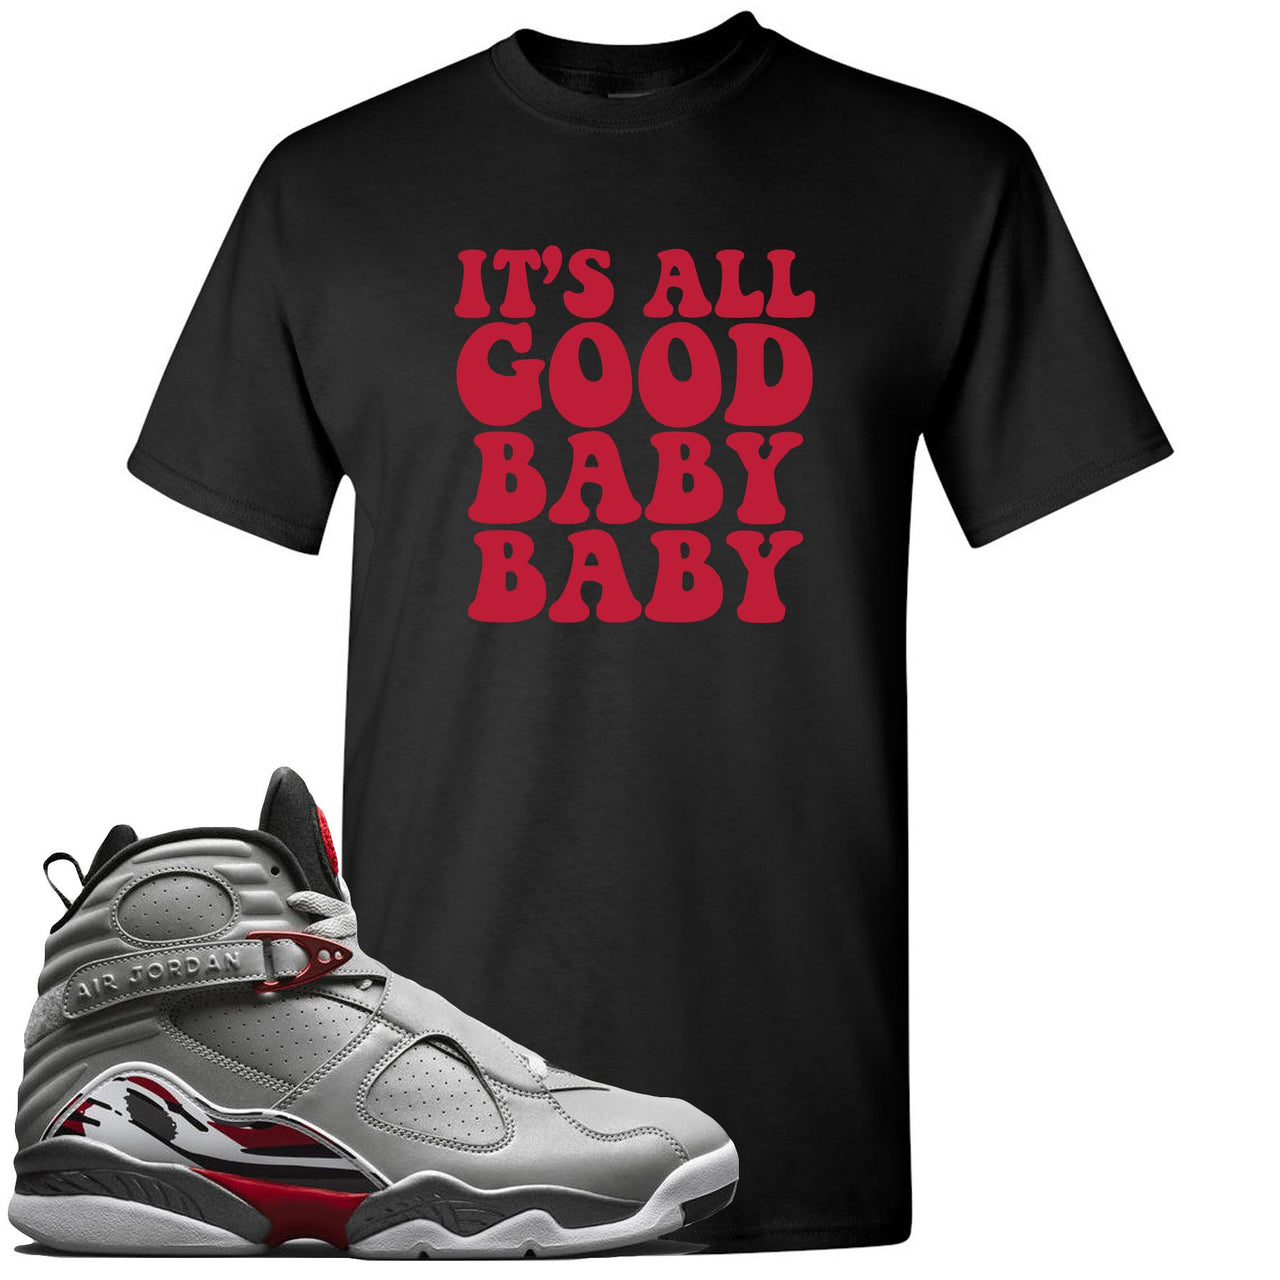 Reflections of a Champion 8s T Shirt | It's All Good Baby Baby, Black